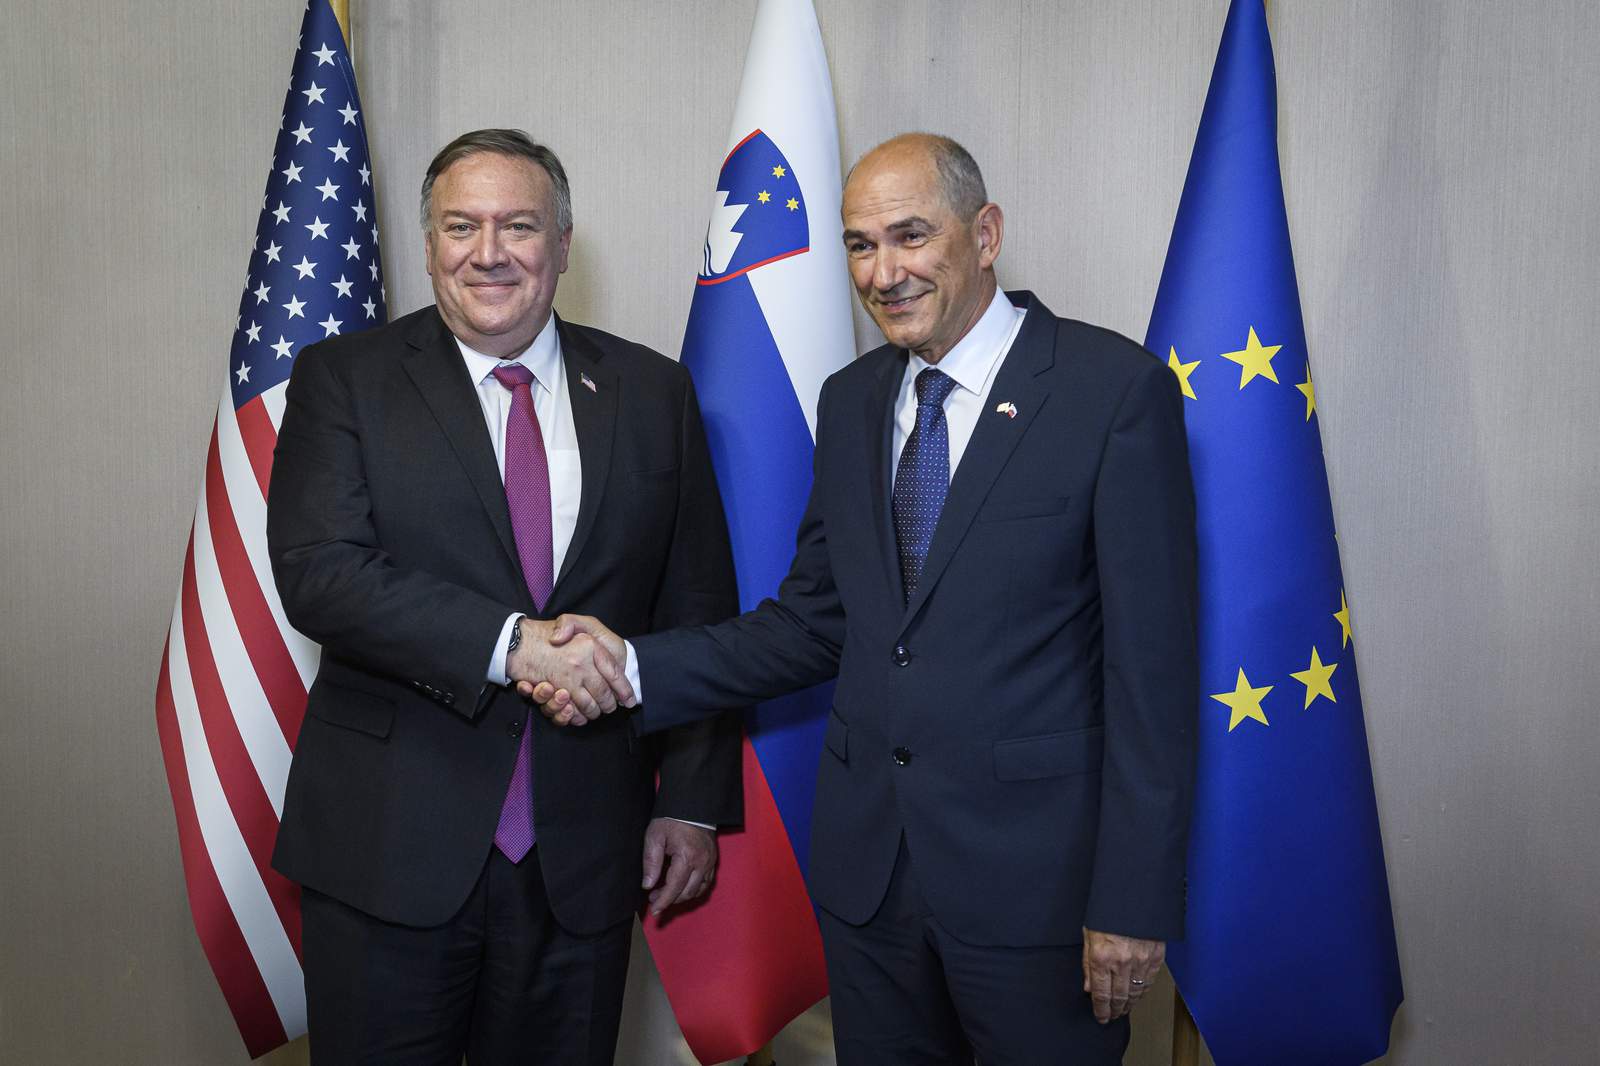 Pompeo, in Slovenia, pushes 5G security, warns about China